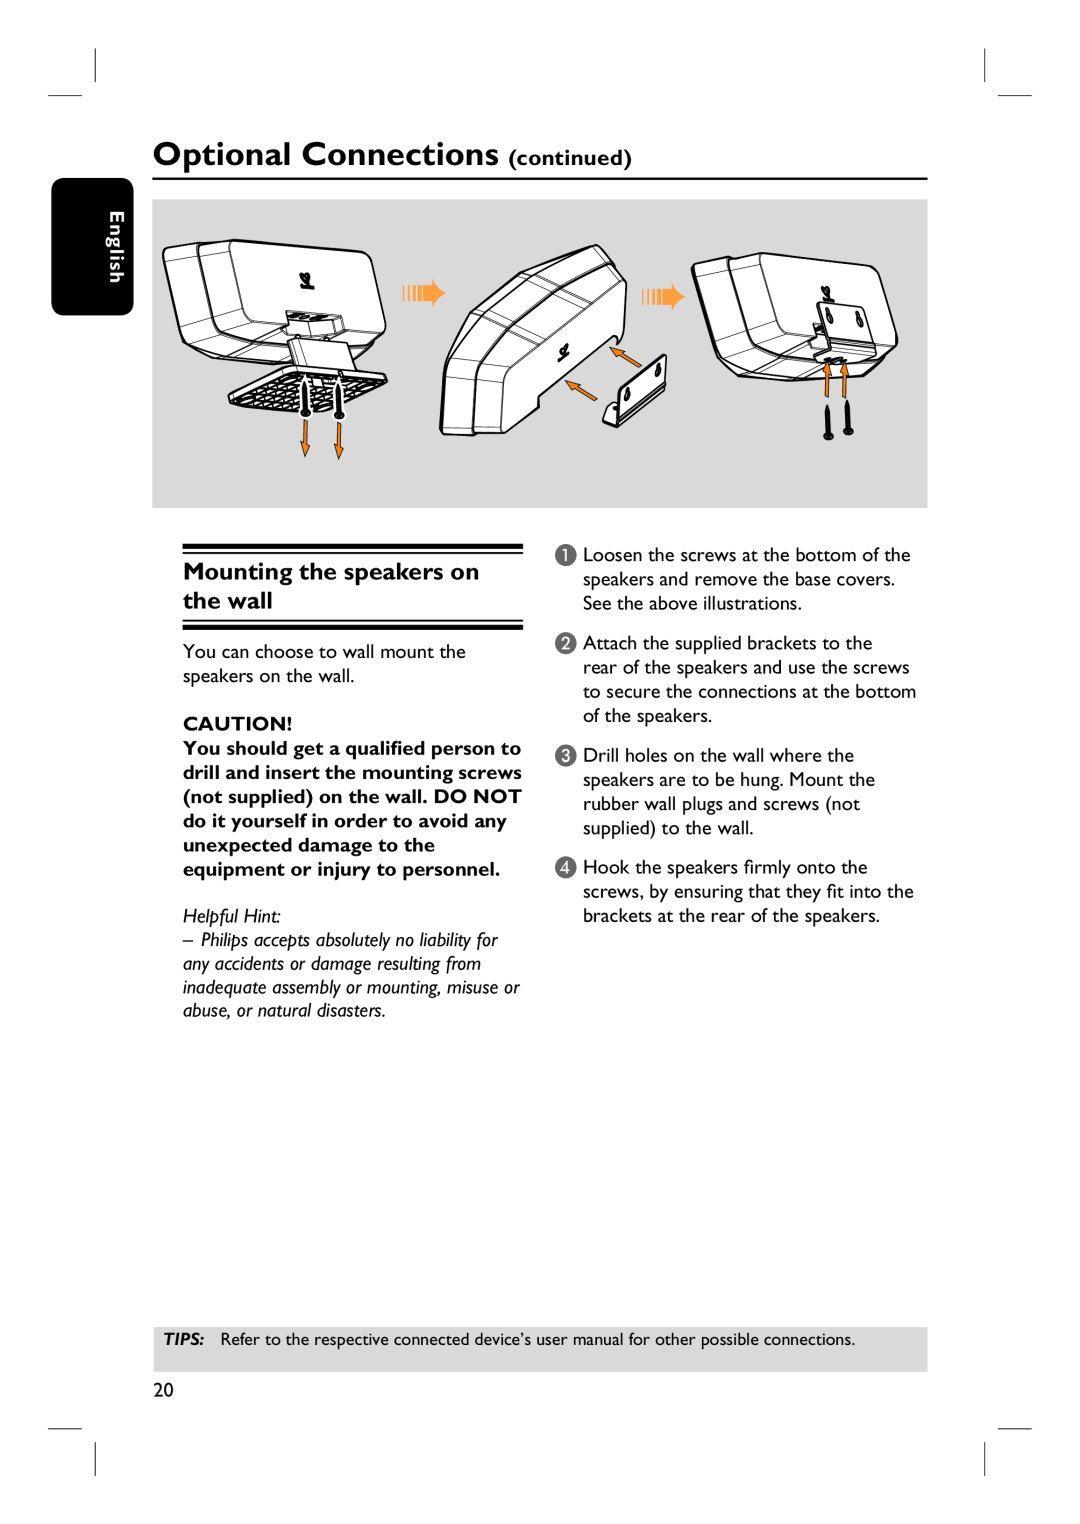 Philips HTS6500 user manual Optional Connections continued, Mounting the speakers on the wall, English, Helpful Hint 